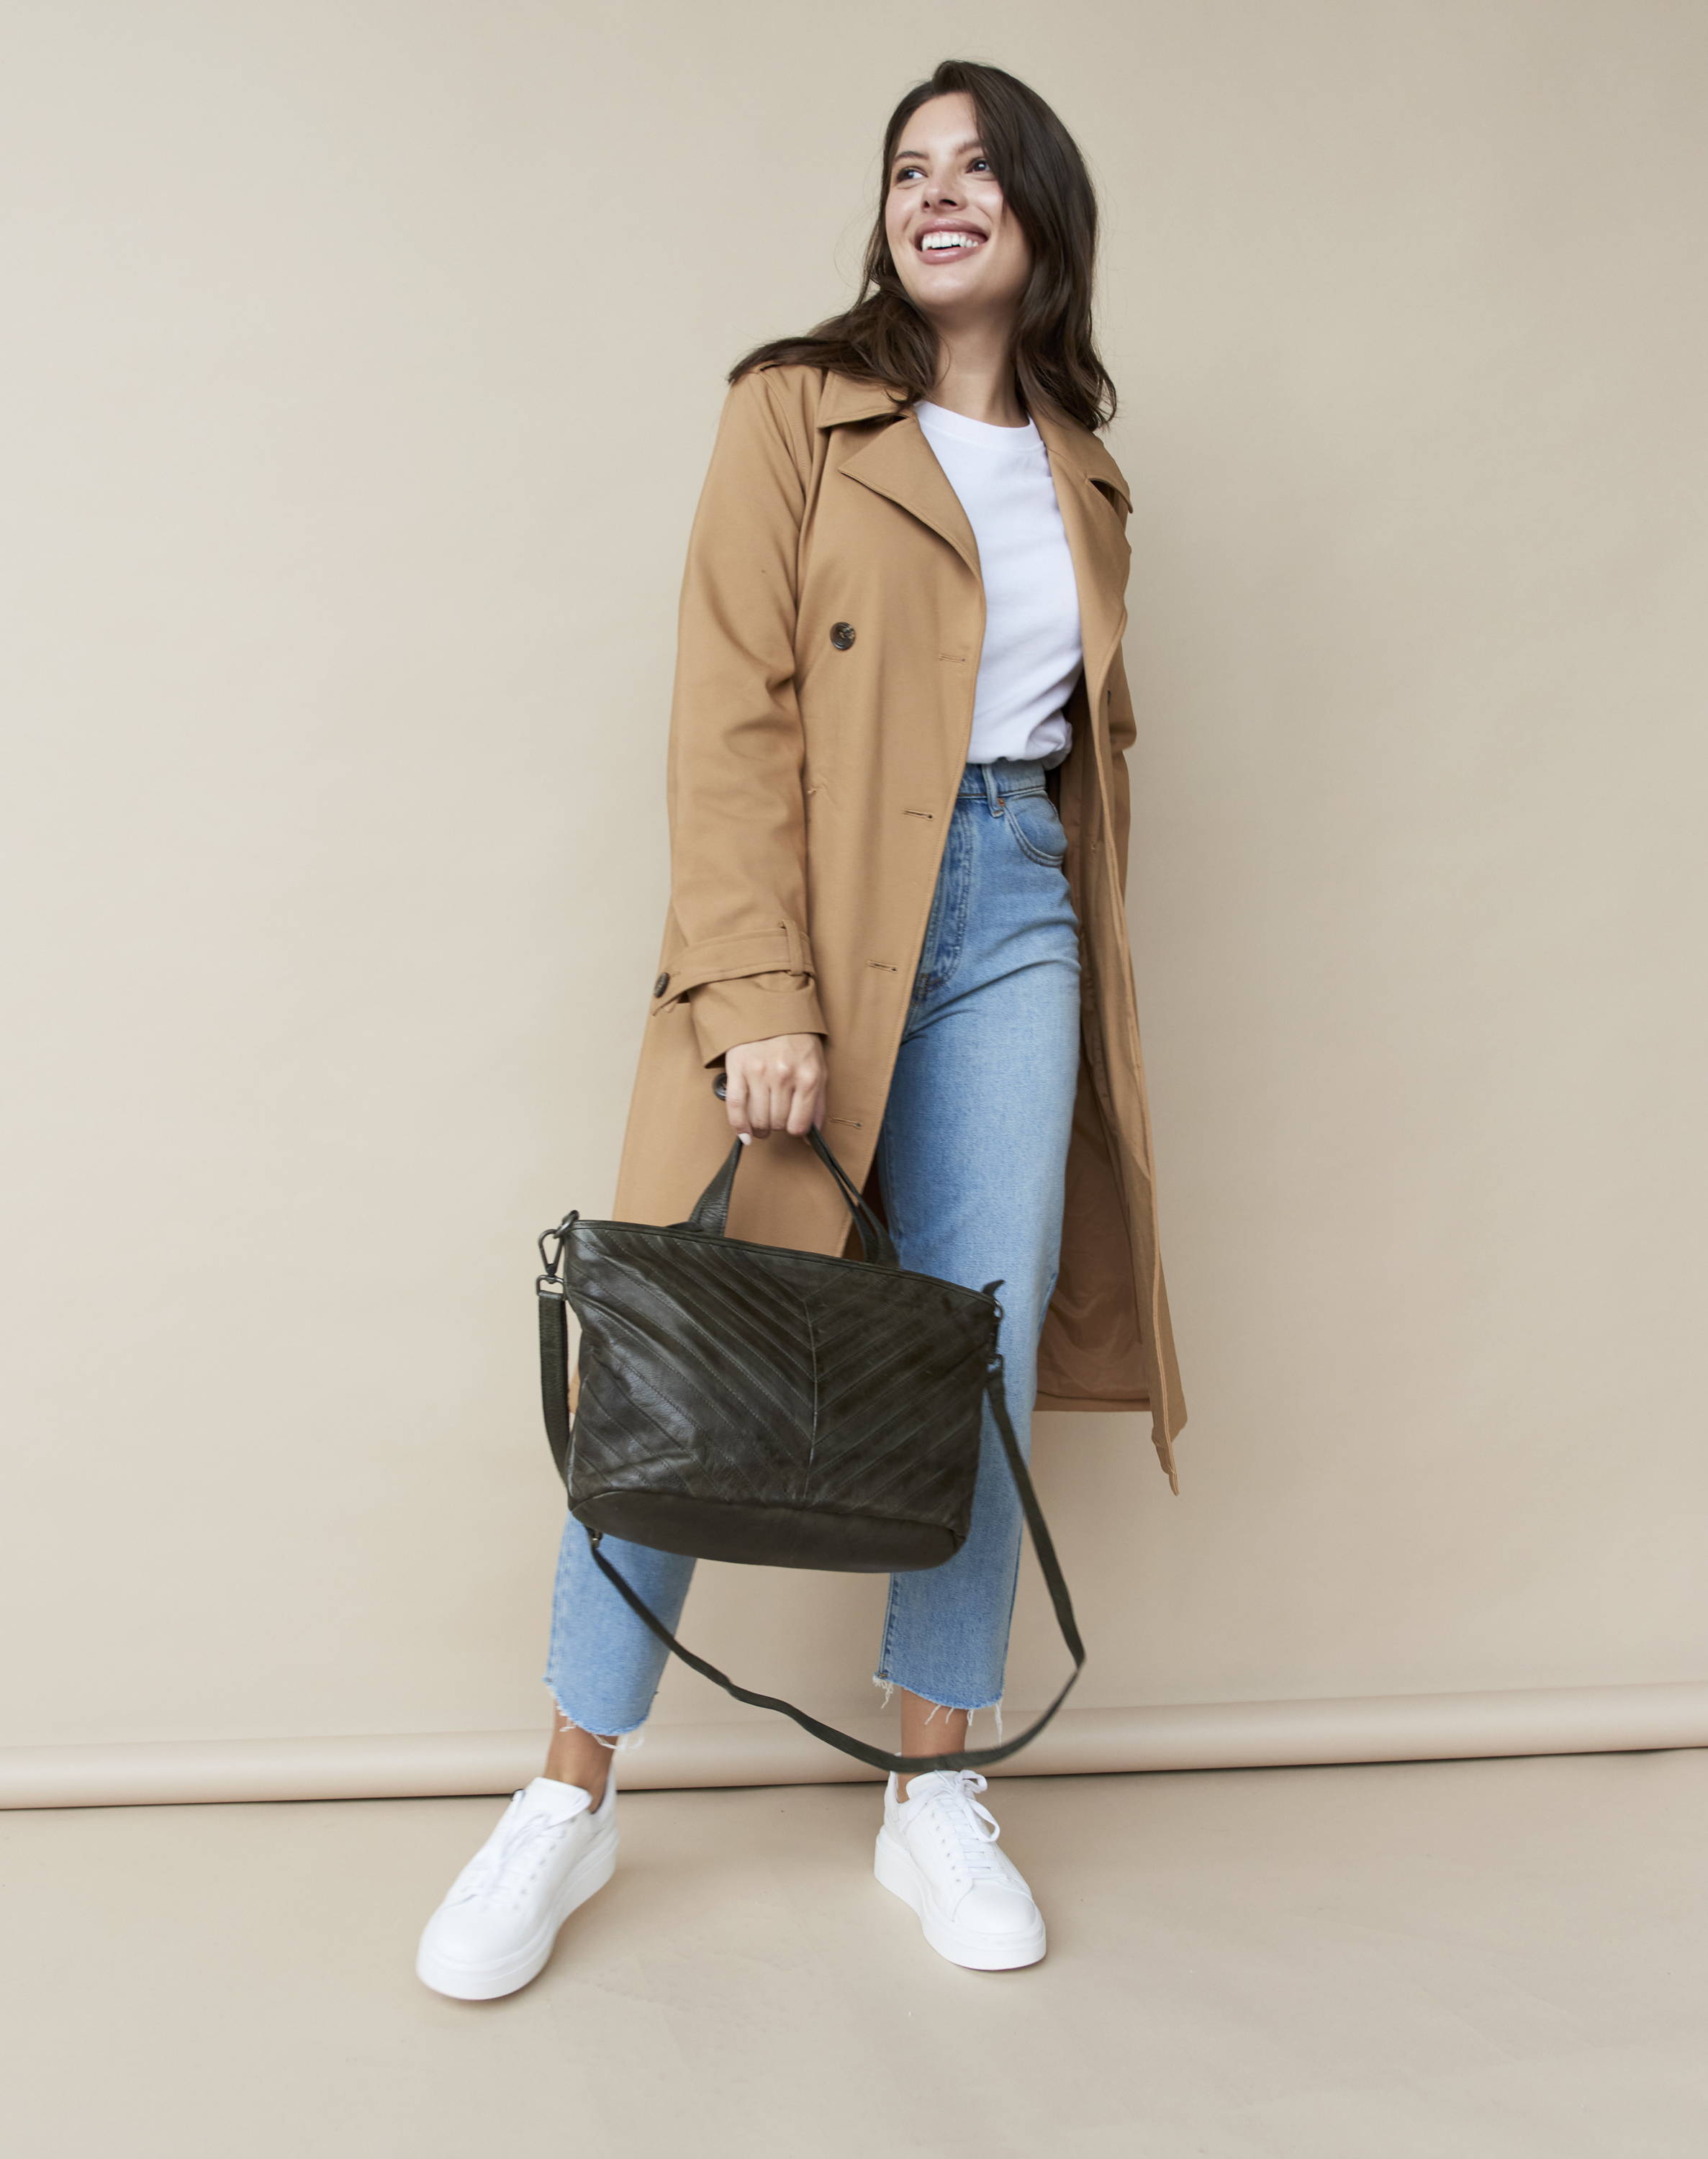 Black leather tote bags | The Morgan Tote Latico Leathers